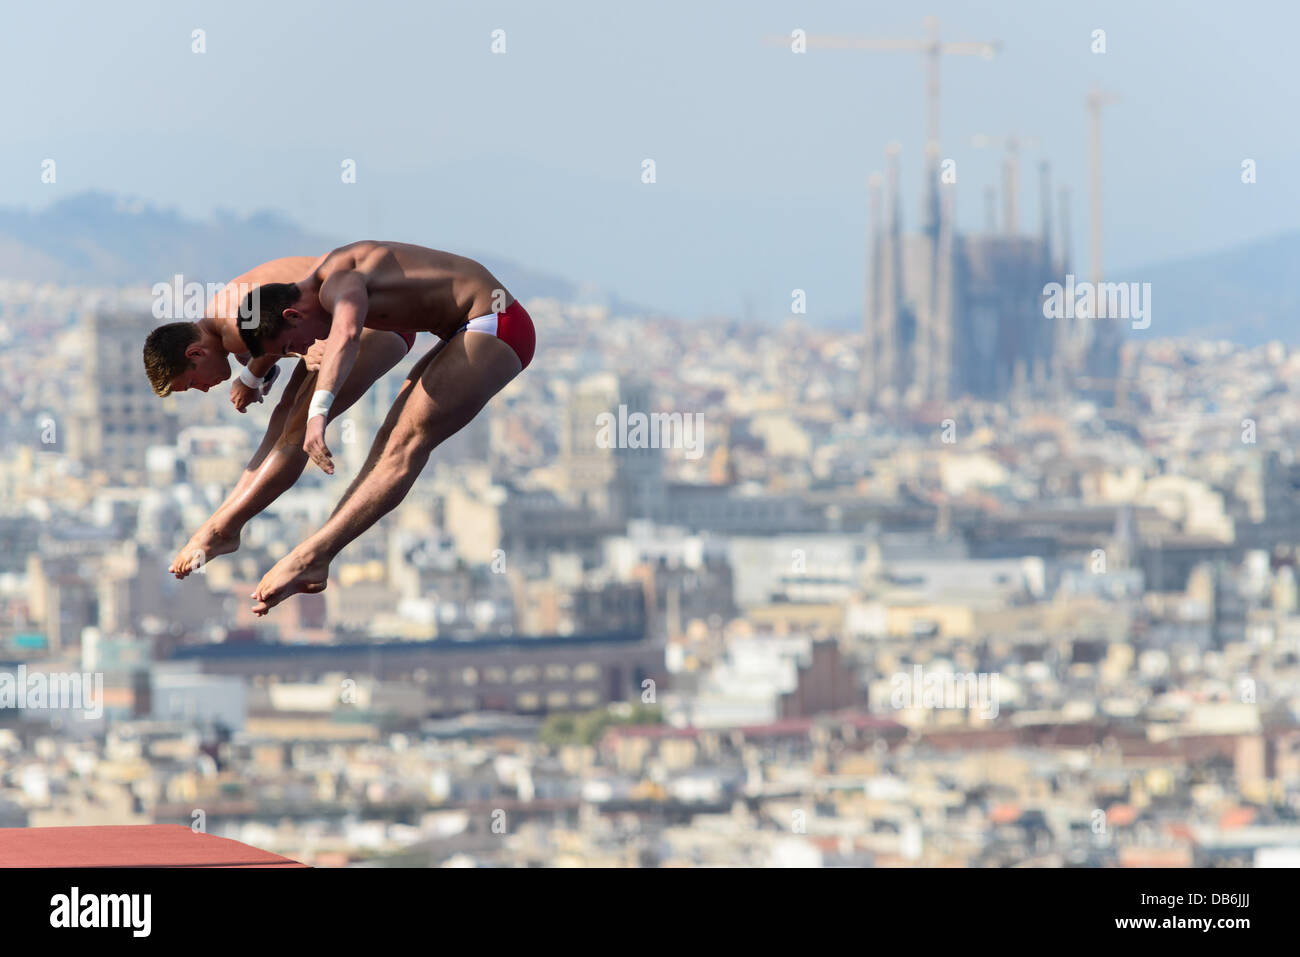 Barcelona, Spain. 21st July 2013: USA's Toby Stanley and David Bonuchi dive during the ten-meter synchro platform competition at the 15th FINA World Championships in Barcelona Stock Photo